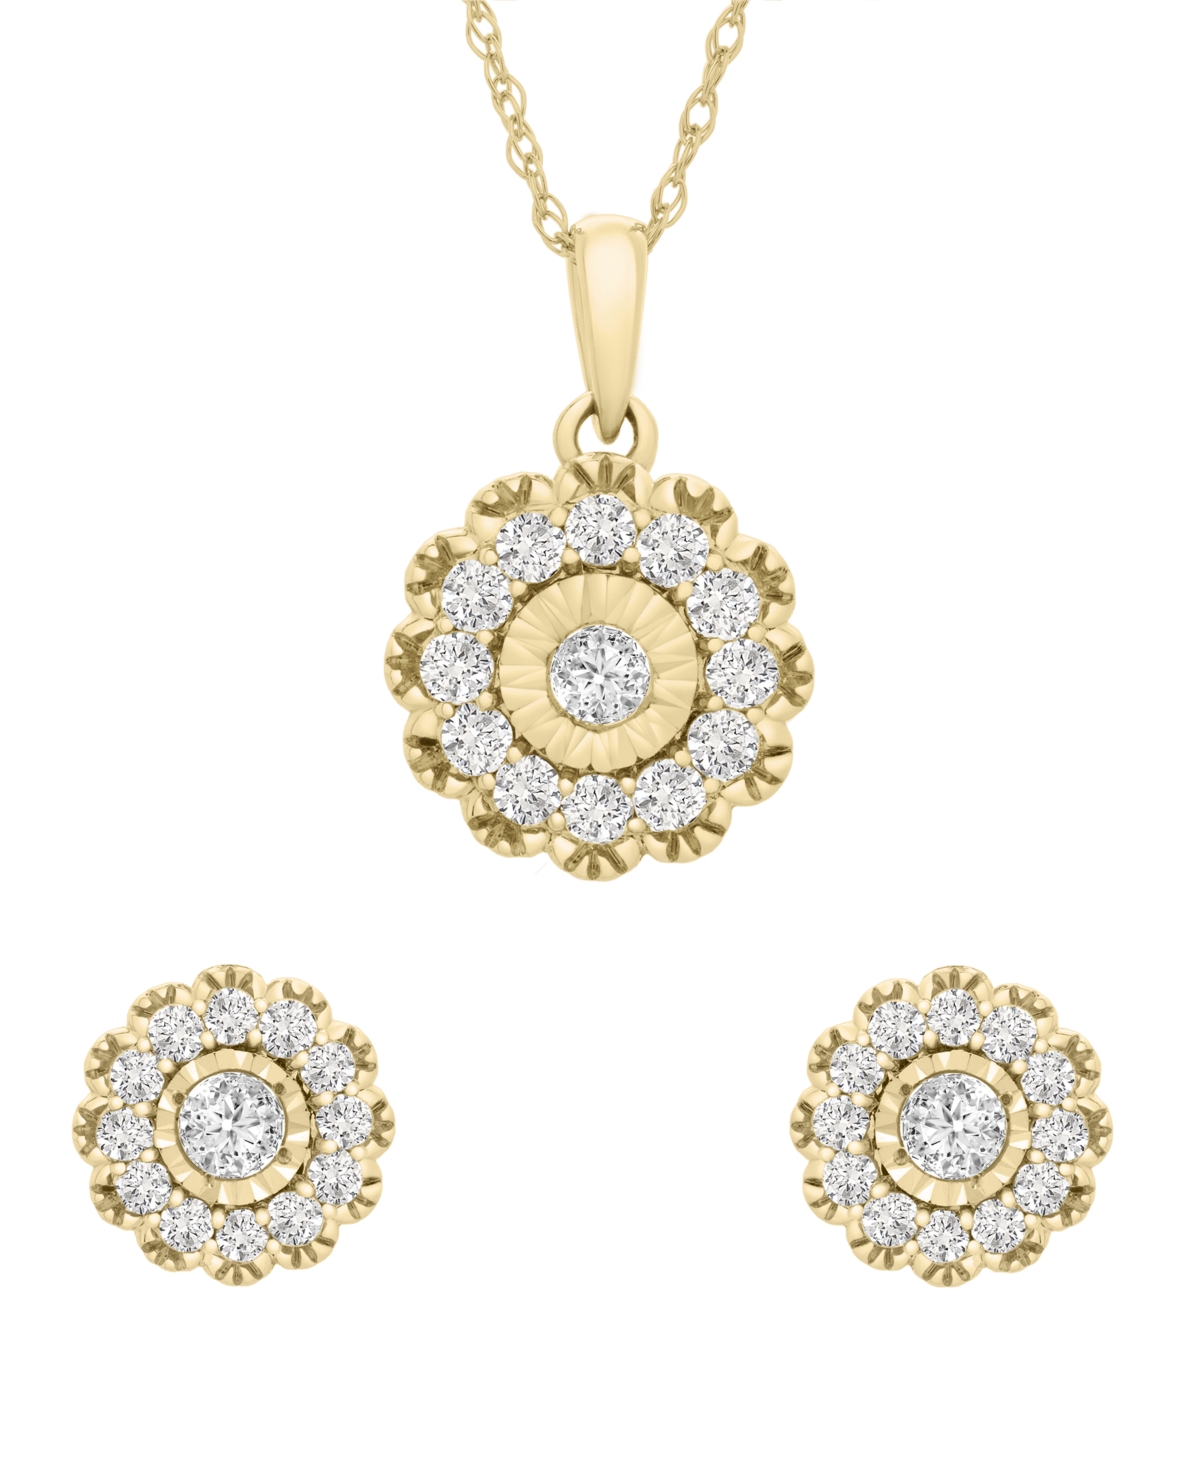 2-Pc. Set Diamond Pendant Necklace & Matching Stud Earrings (1 ct. t.w.) in 14k White Gold or 14k Yellow Gold, Created for Macy's - Ye